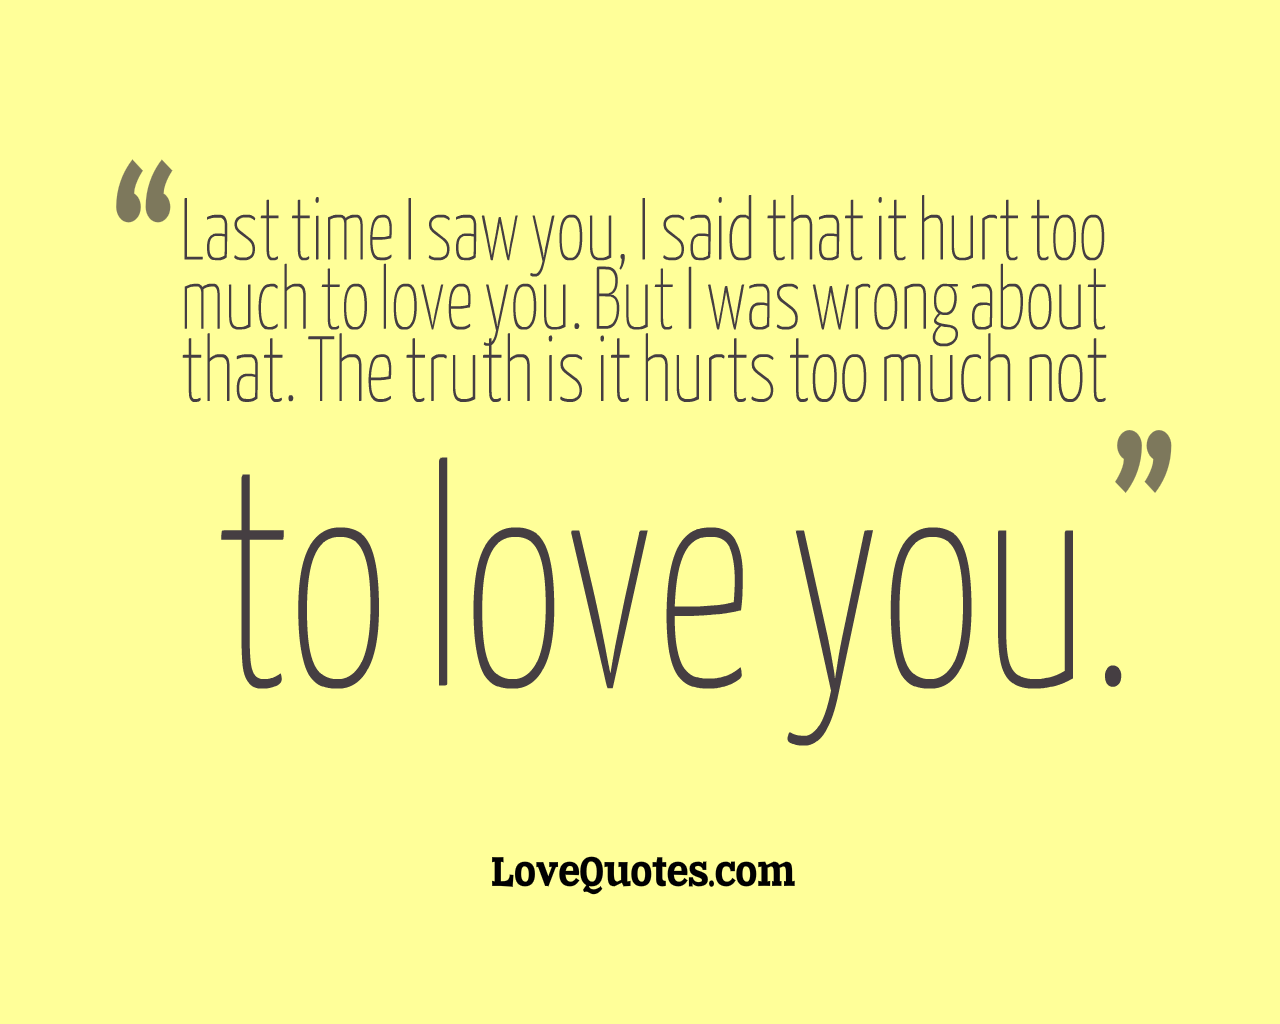 It Hurt Too Much To Love You